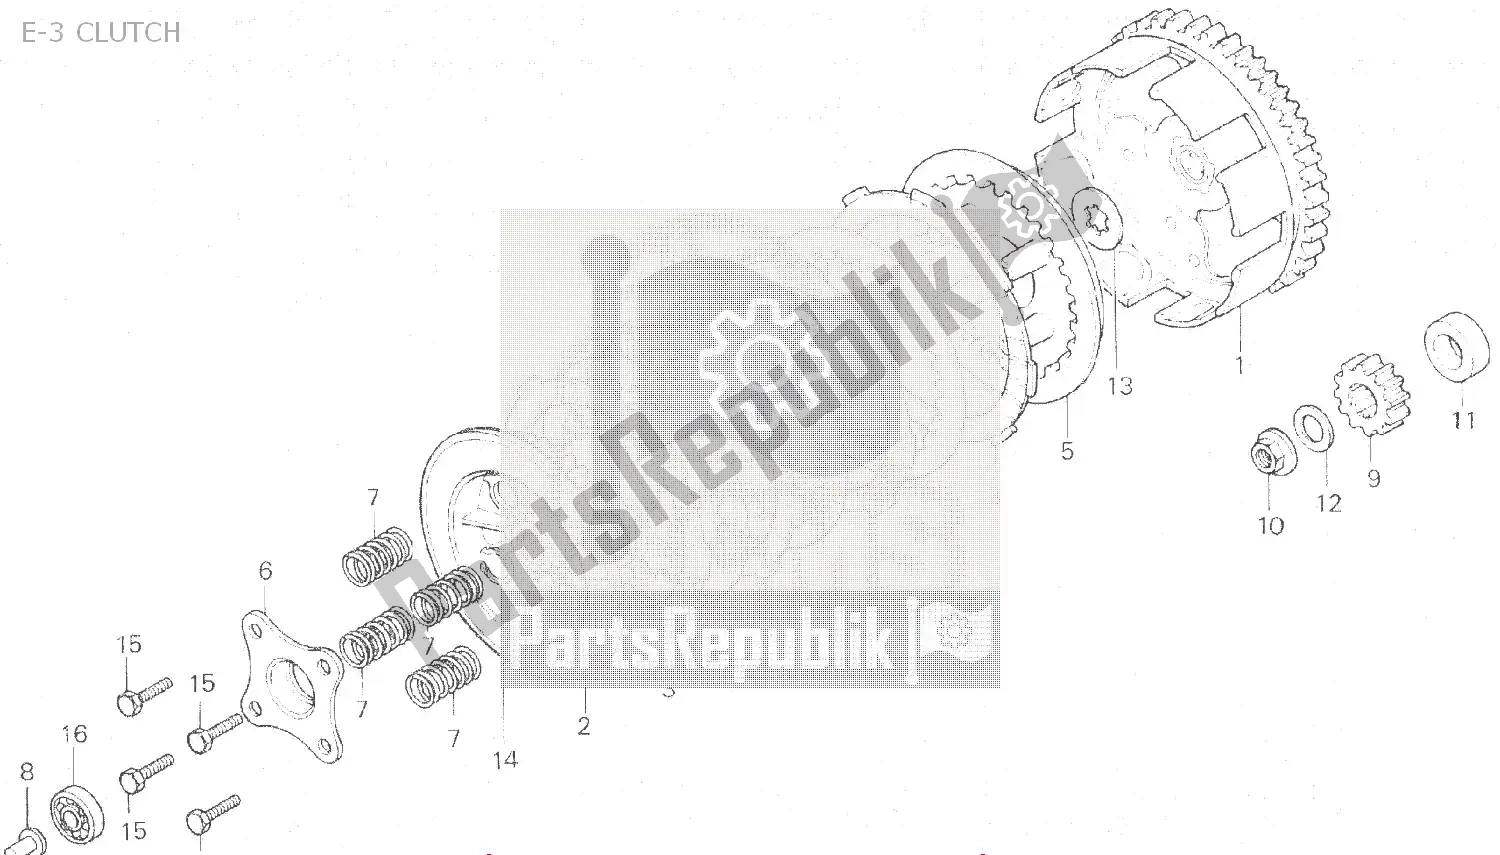 All parts for the E-3 Clutch of the Honda MB 100 1980